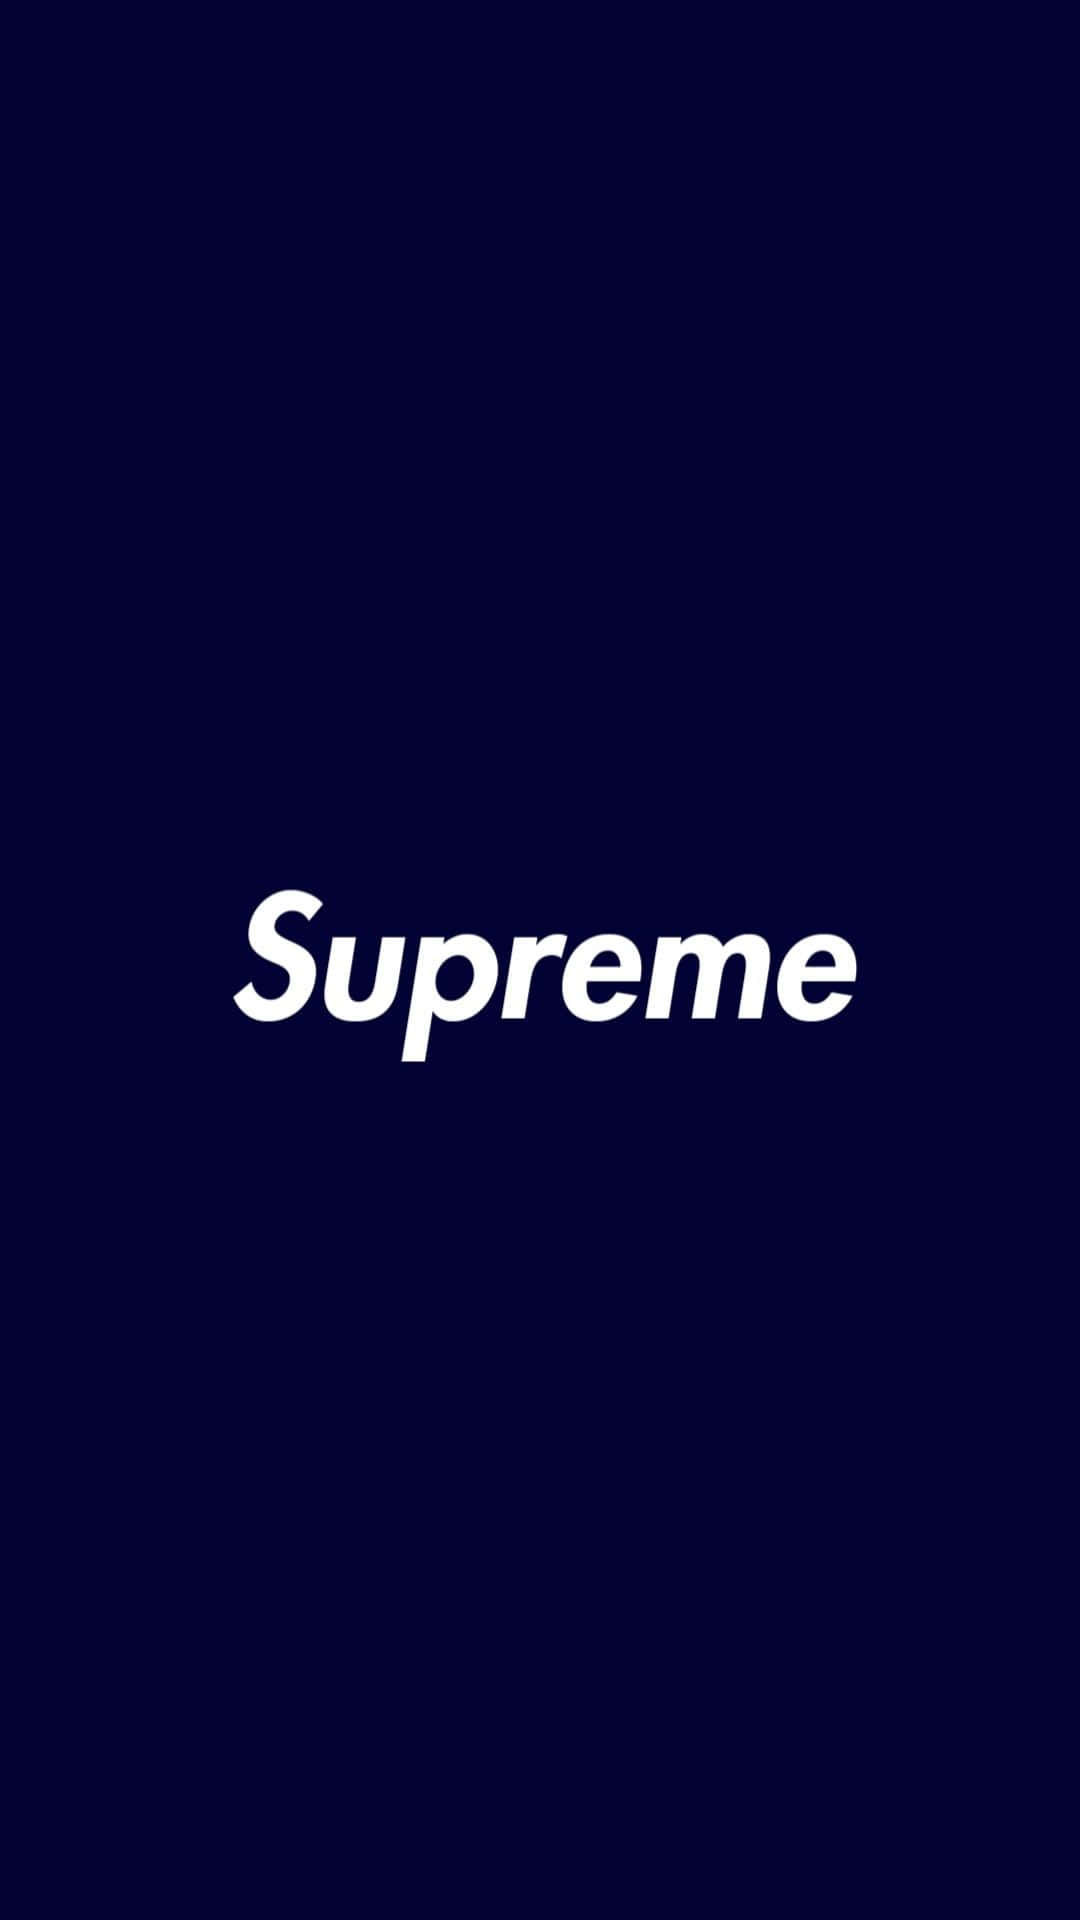 In Style And Comfort: Get The Look With Blue Supreme Background